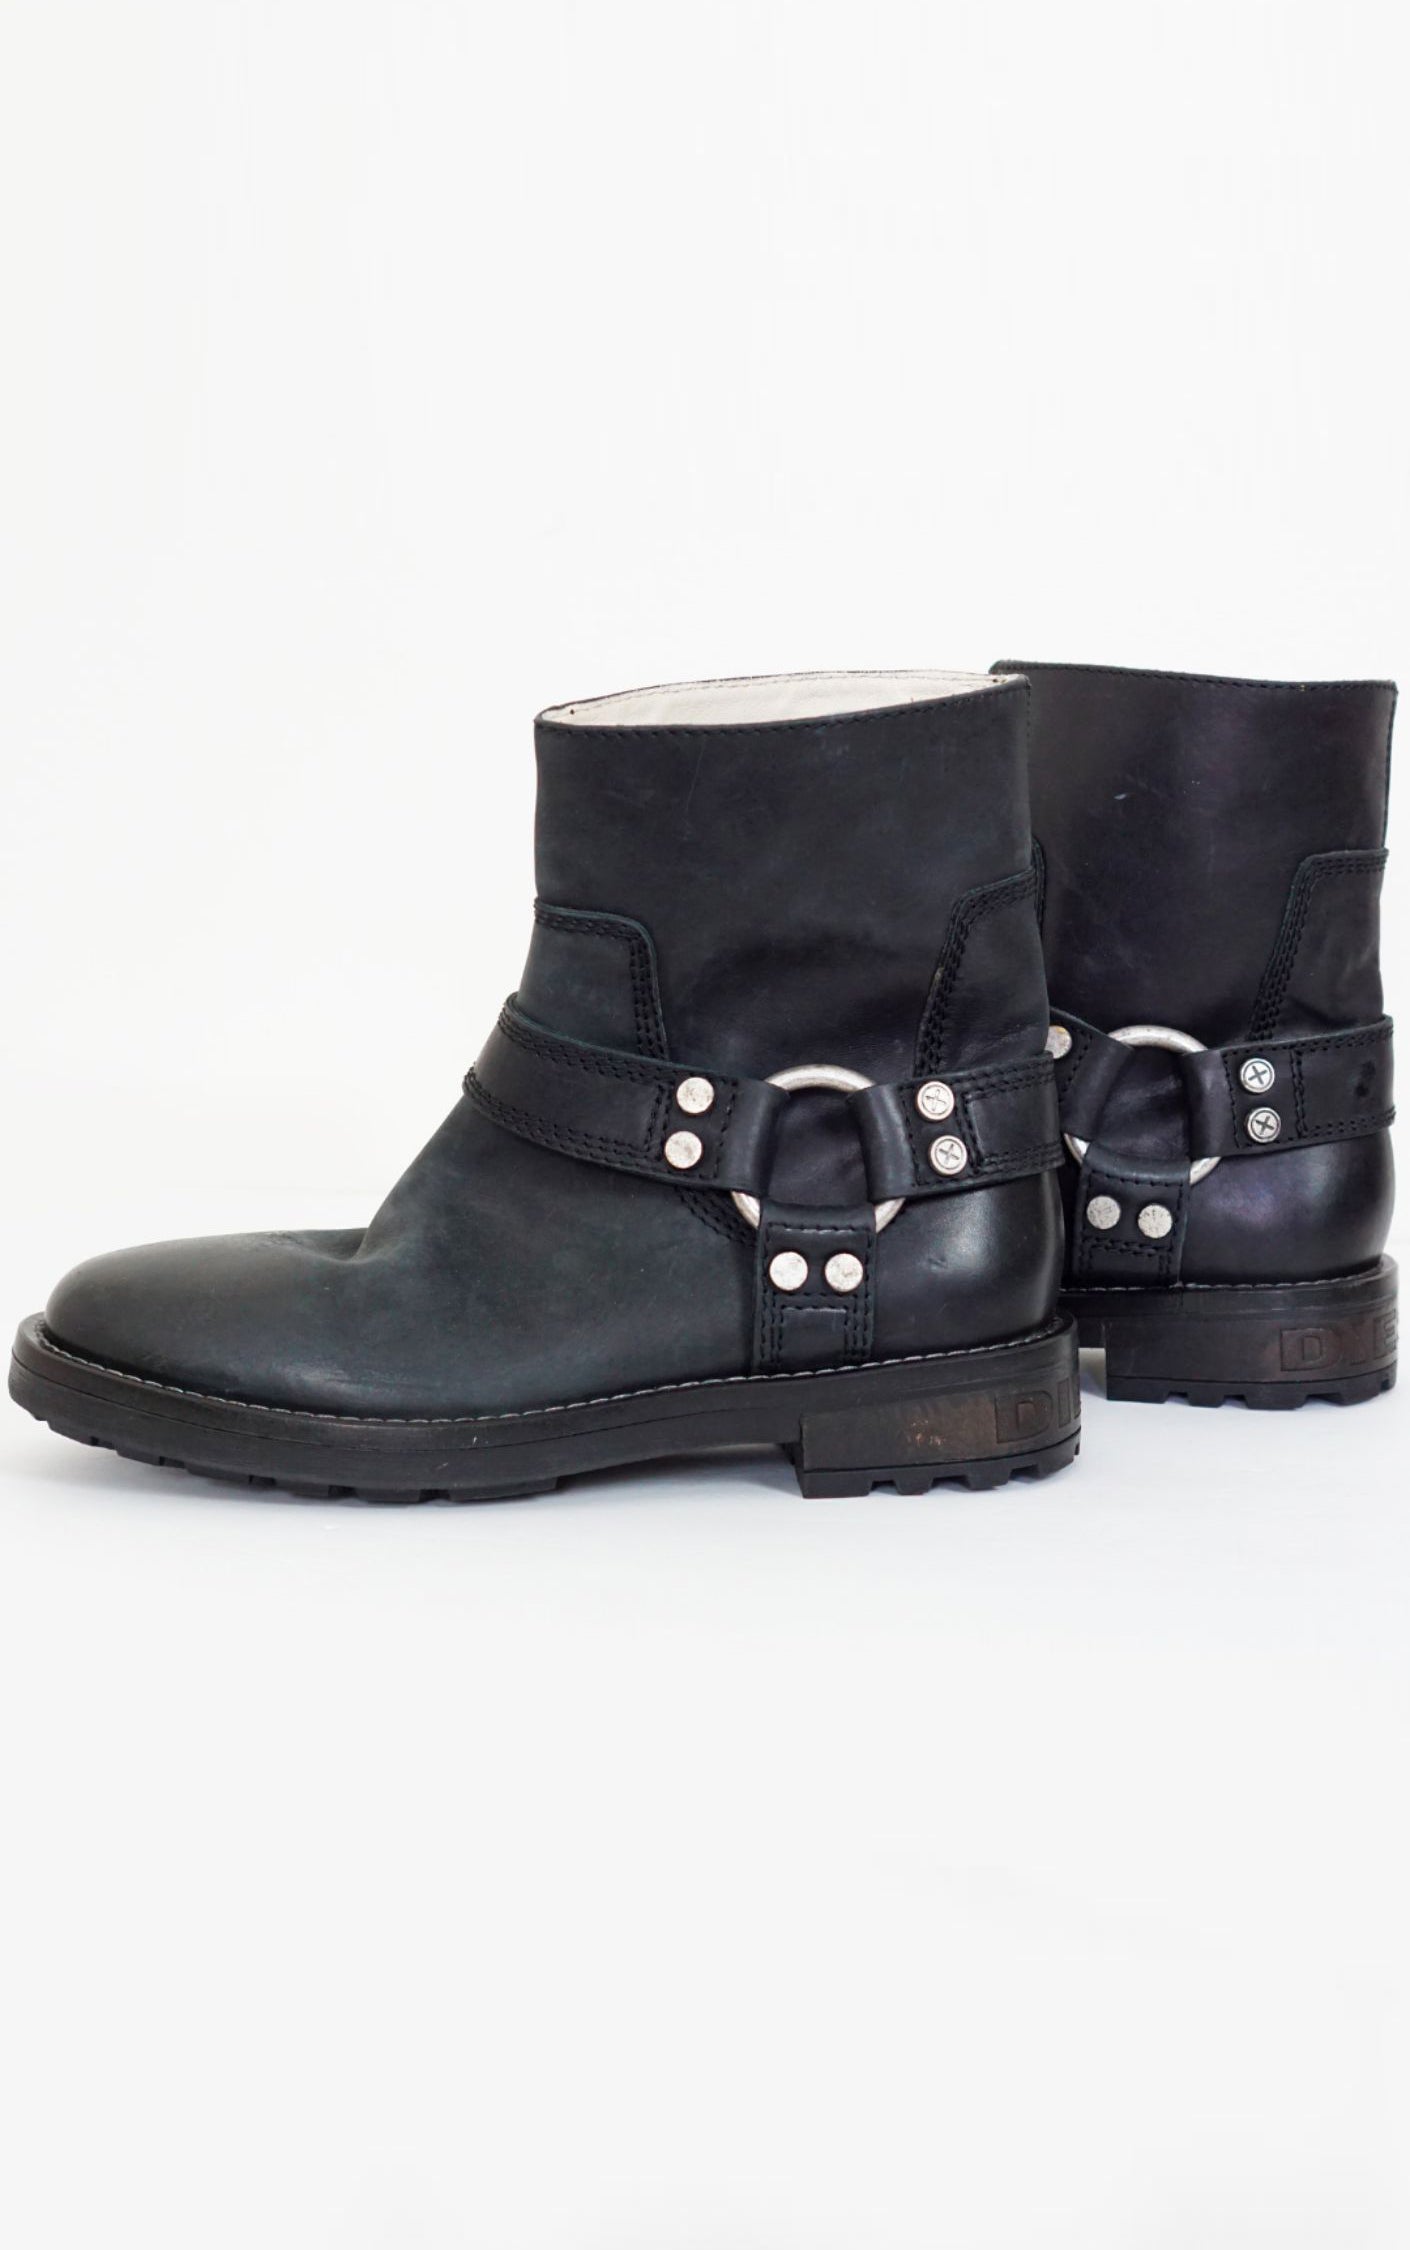 DIESEL Leather Biker Ankle Boots resellum